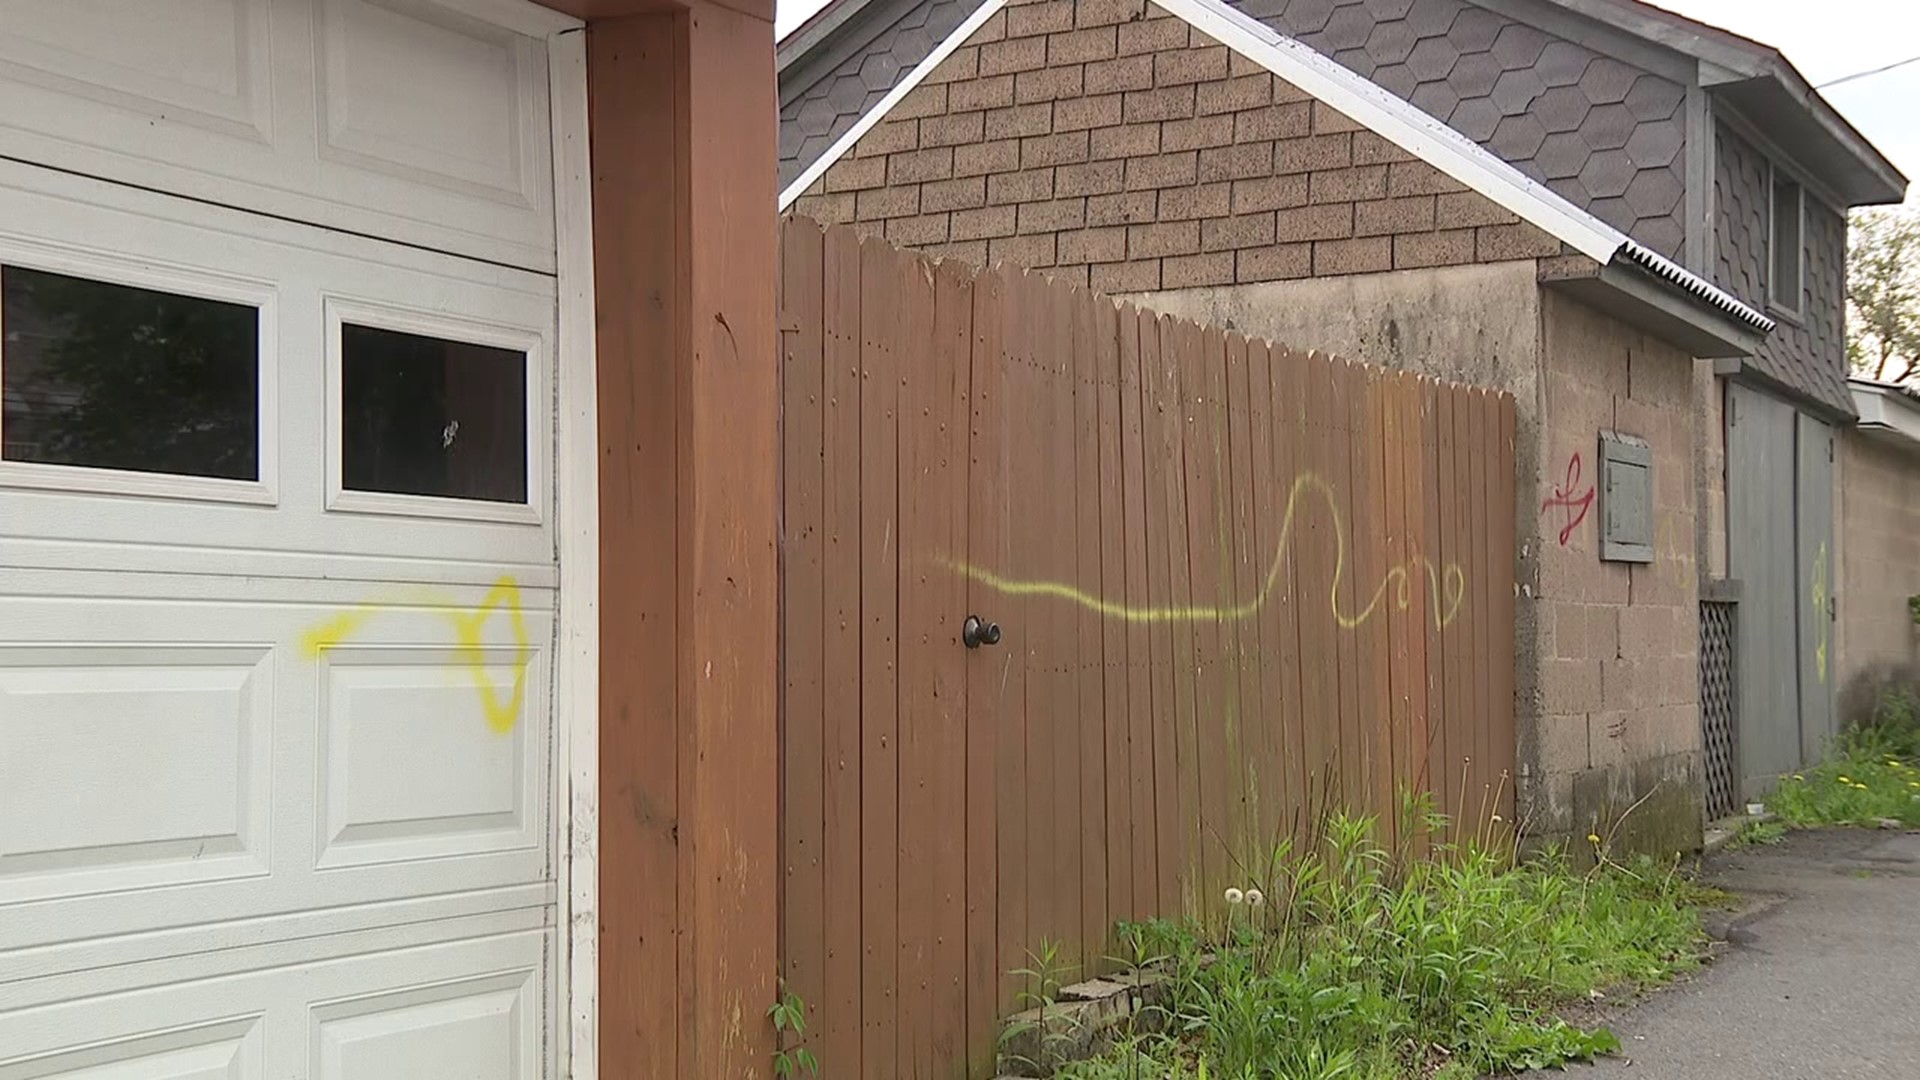 Officials say a group of people vandalized homes, cars, and garages throughout Mount Carmel Wednesday night.